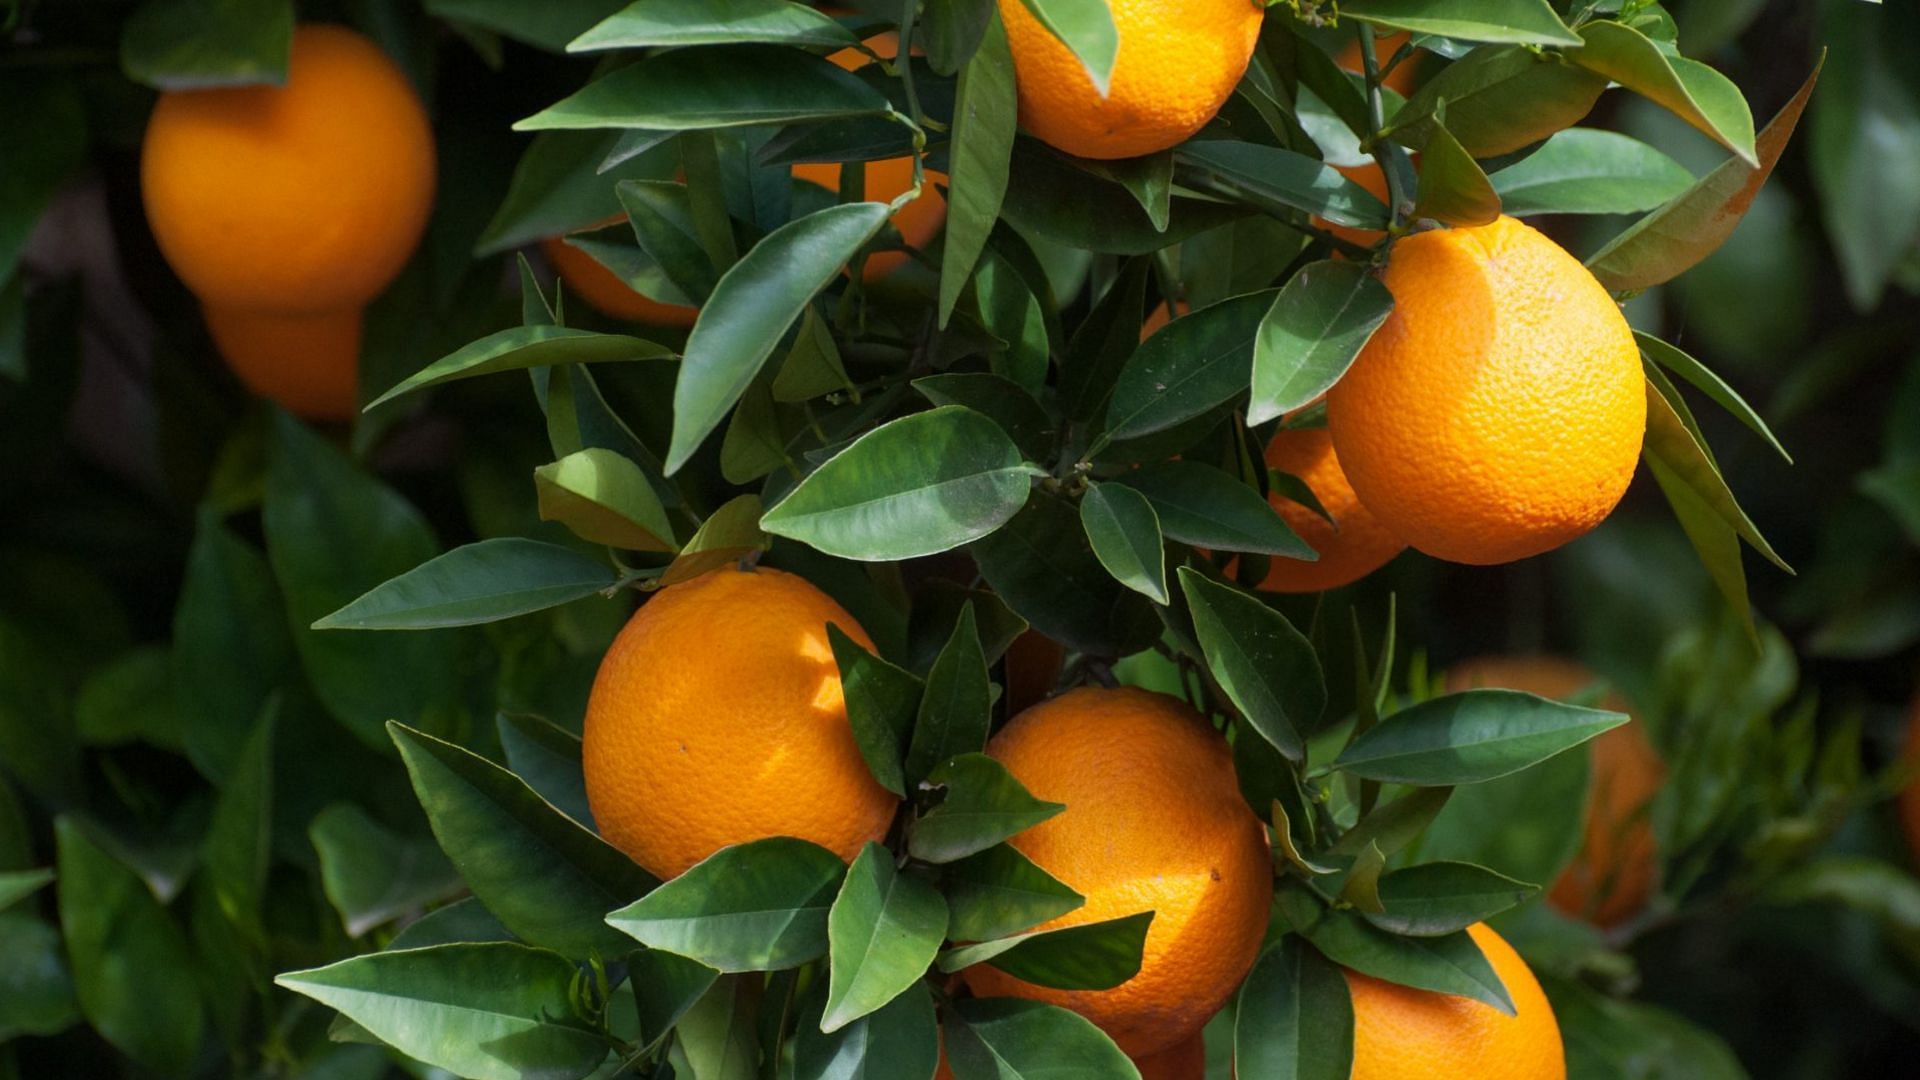 Citrus production, including oranges, could be greatly affected if citrus greening starts spreading to the trees (Image via Barbara Rich/Getty Images)